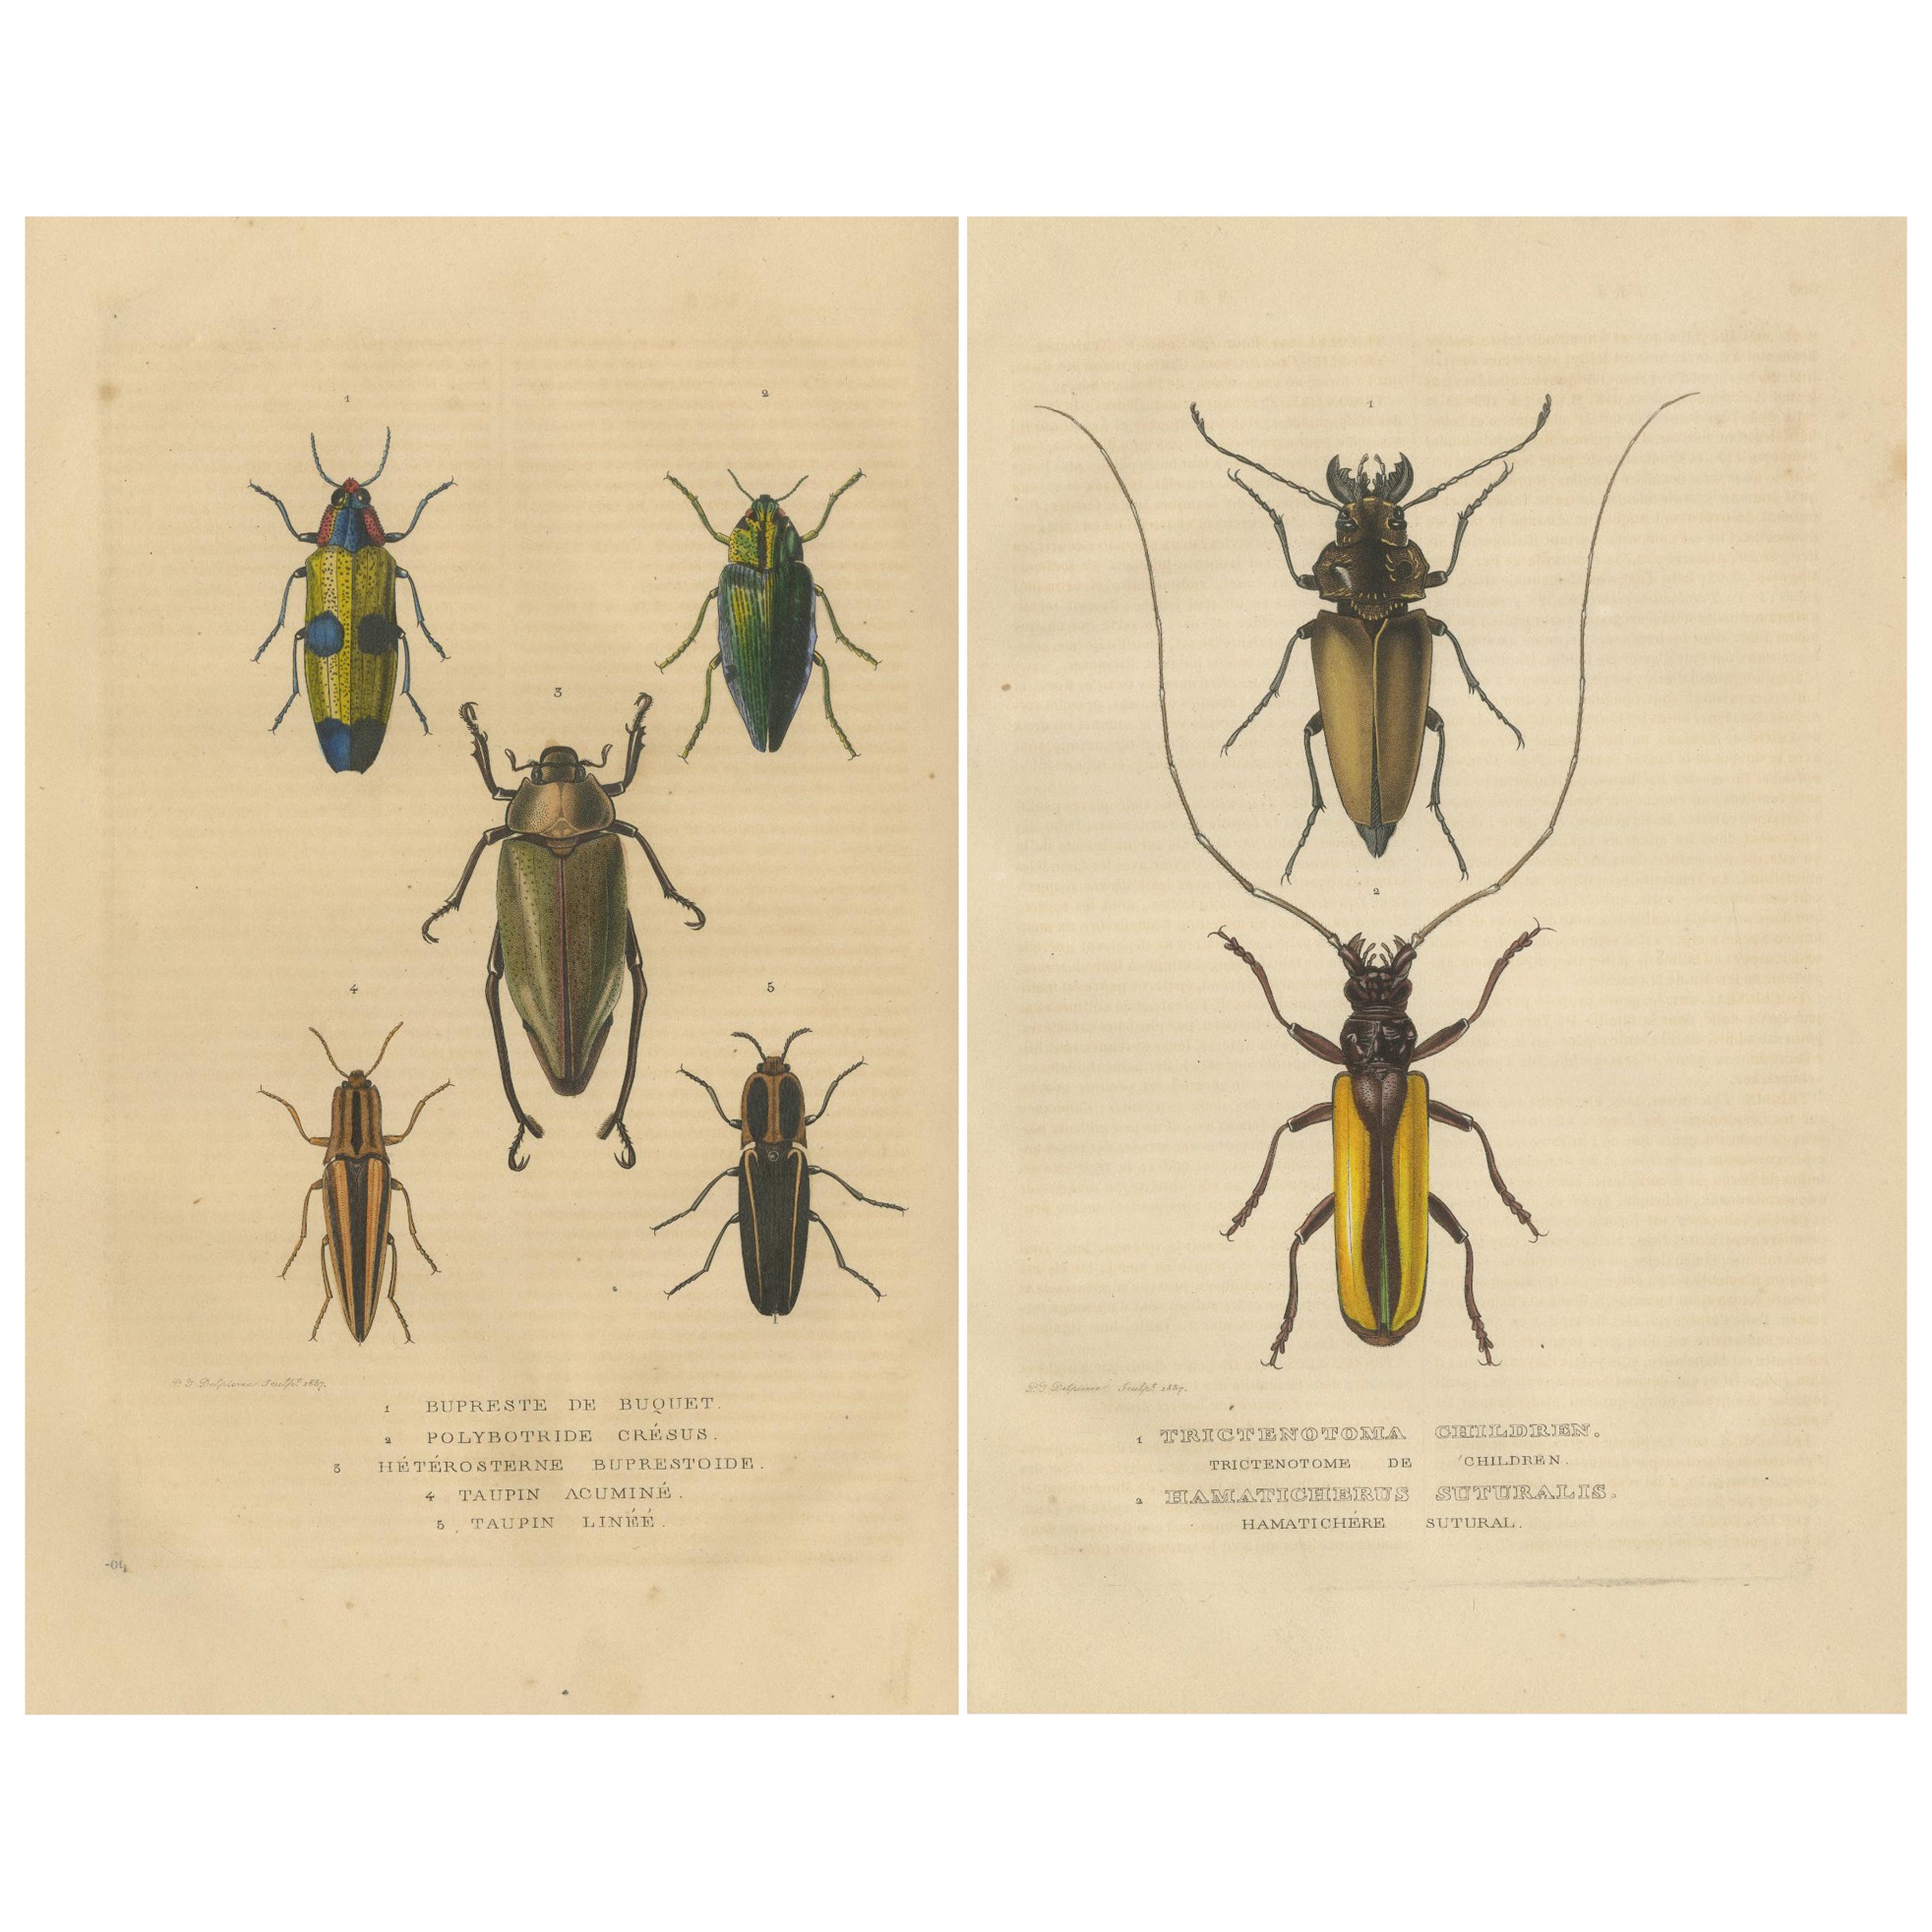 Exquisite 1845 Handcolored Beetle Engravings: A Duo of Entomological Elegance